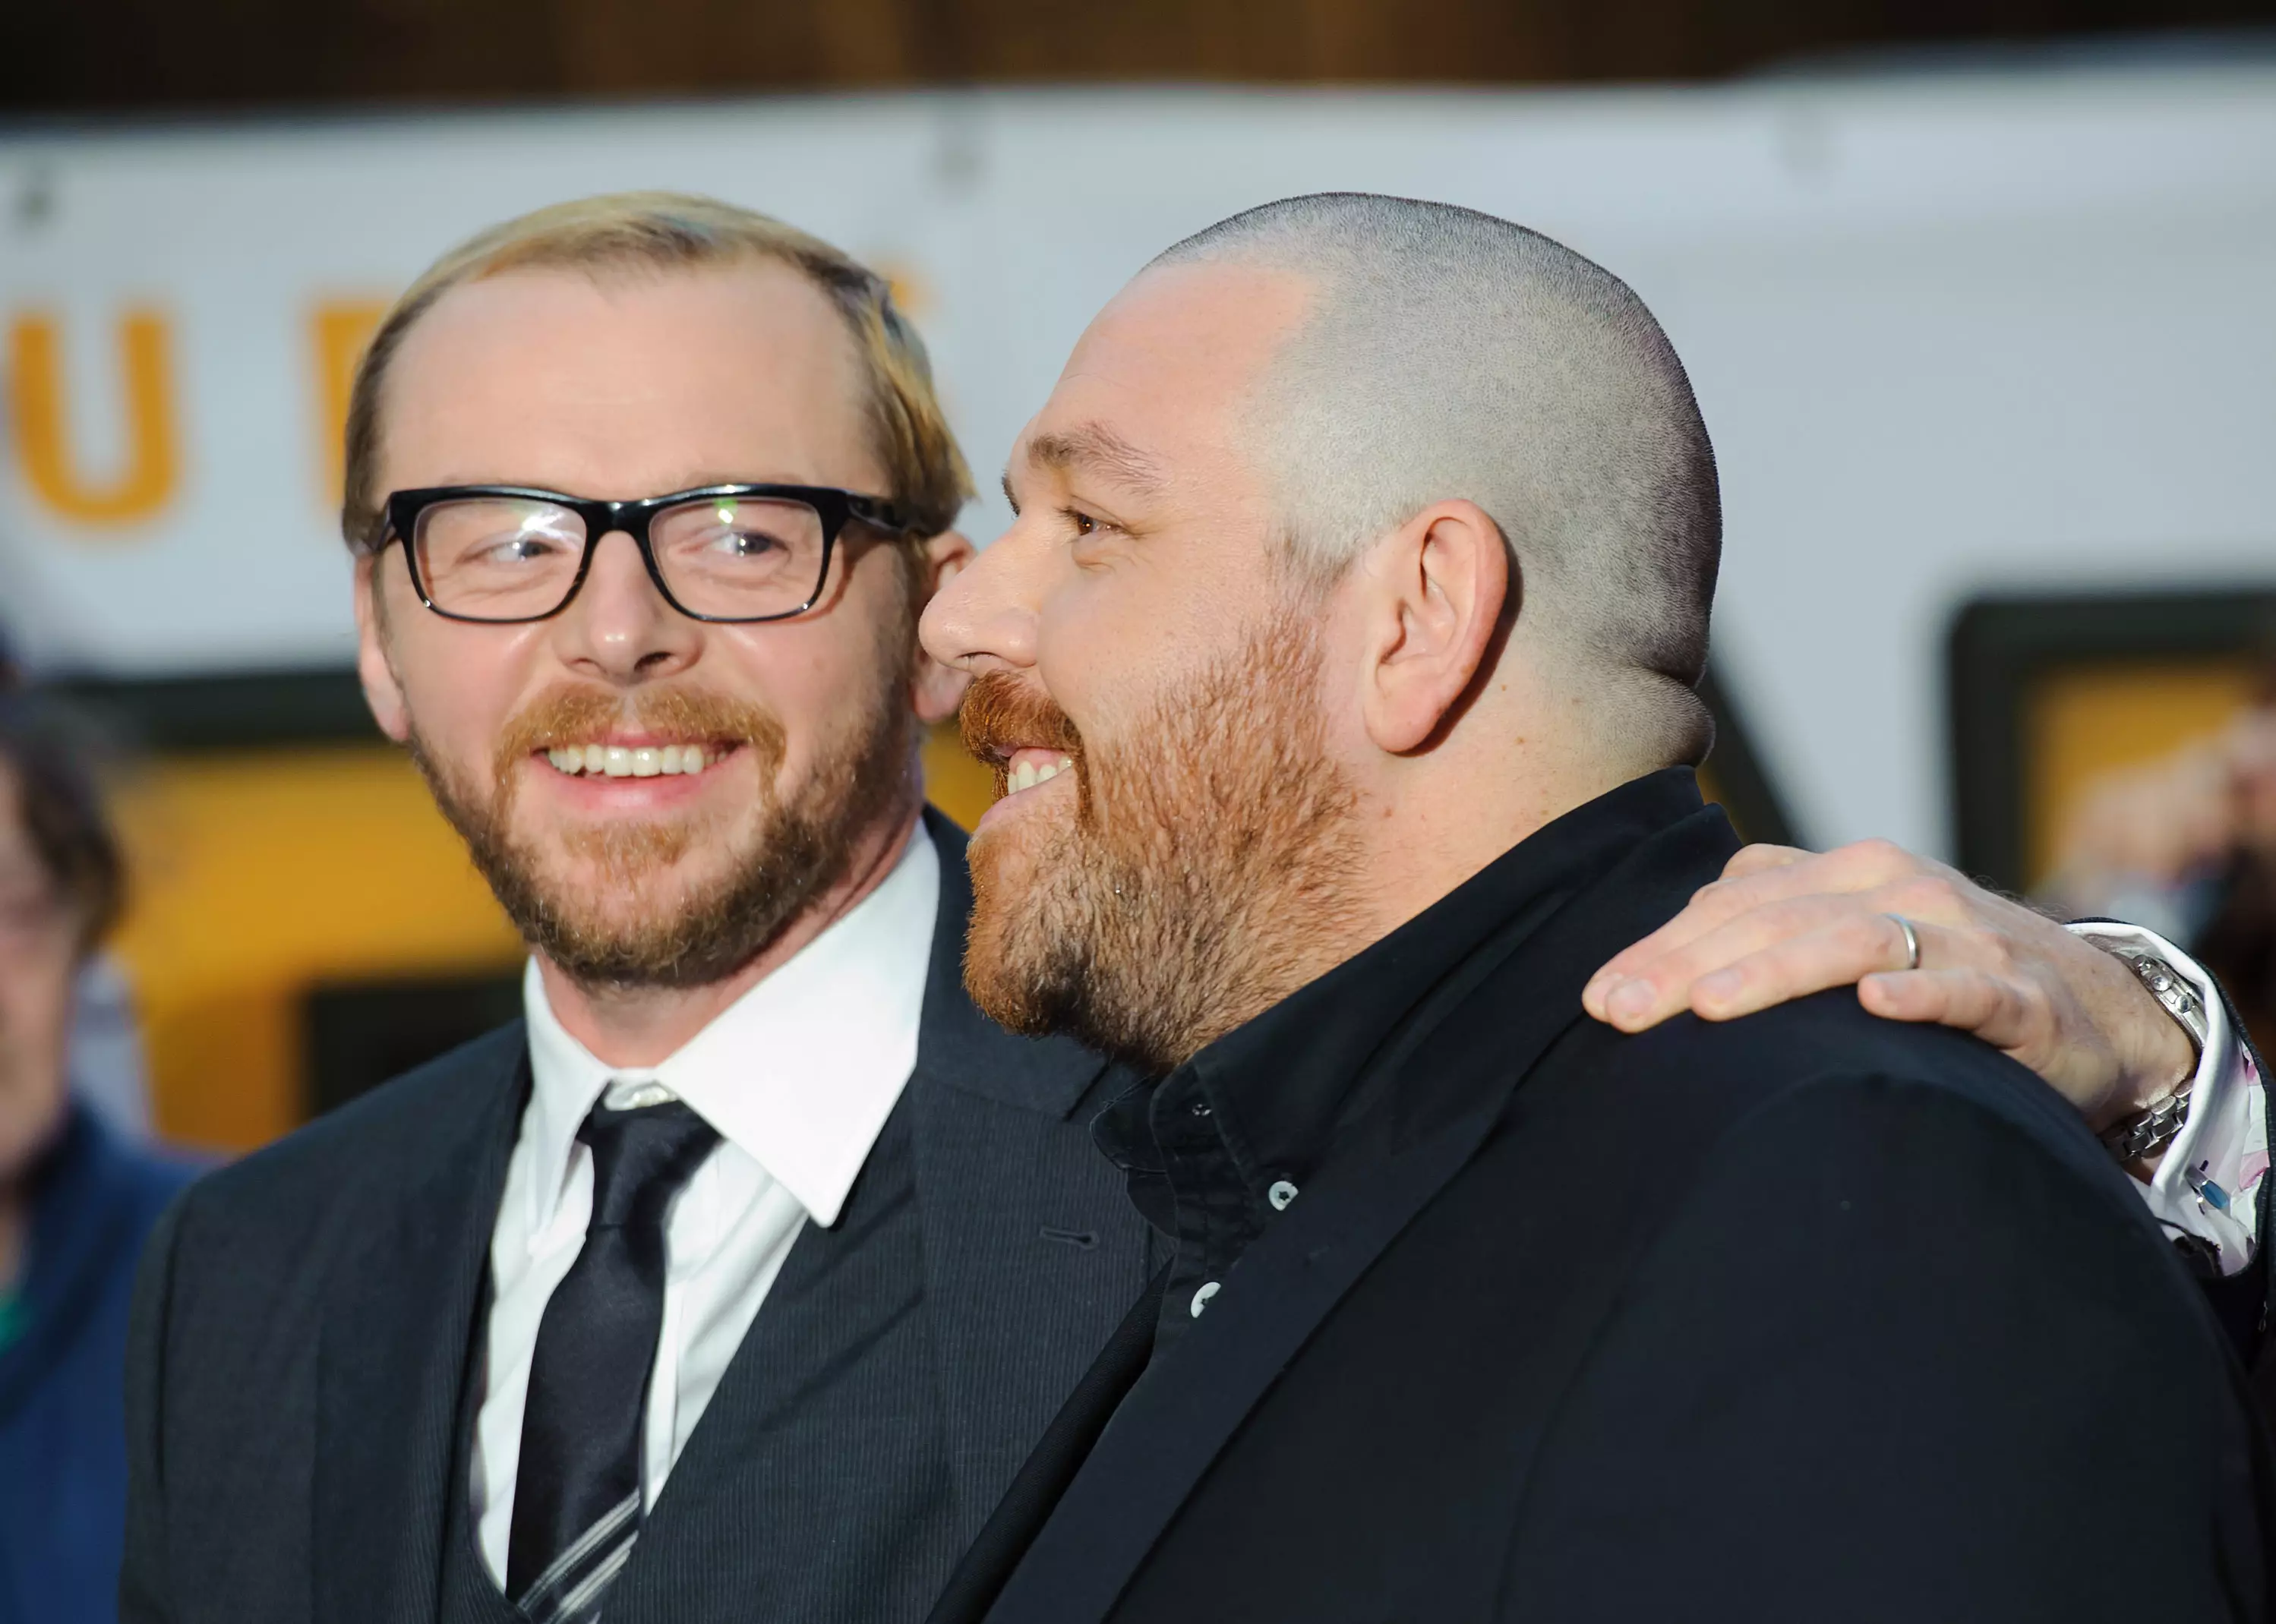 Simon Pegg and Nick Frost are working on a new film.